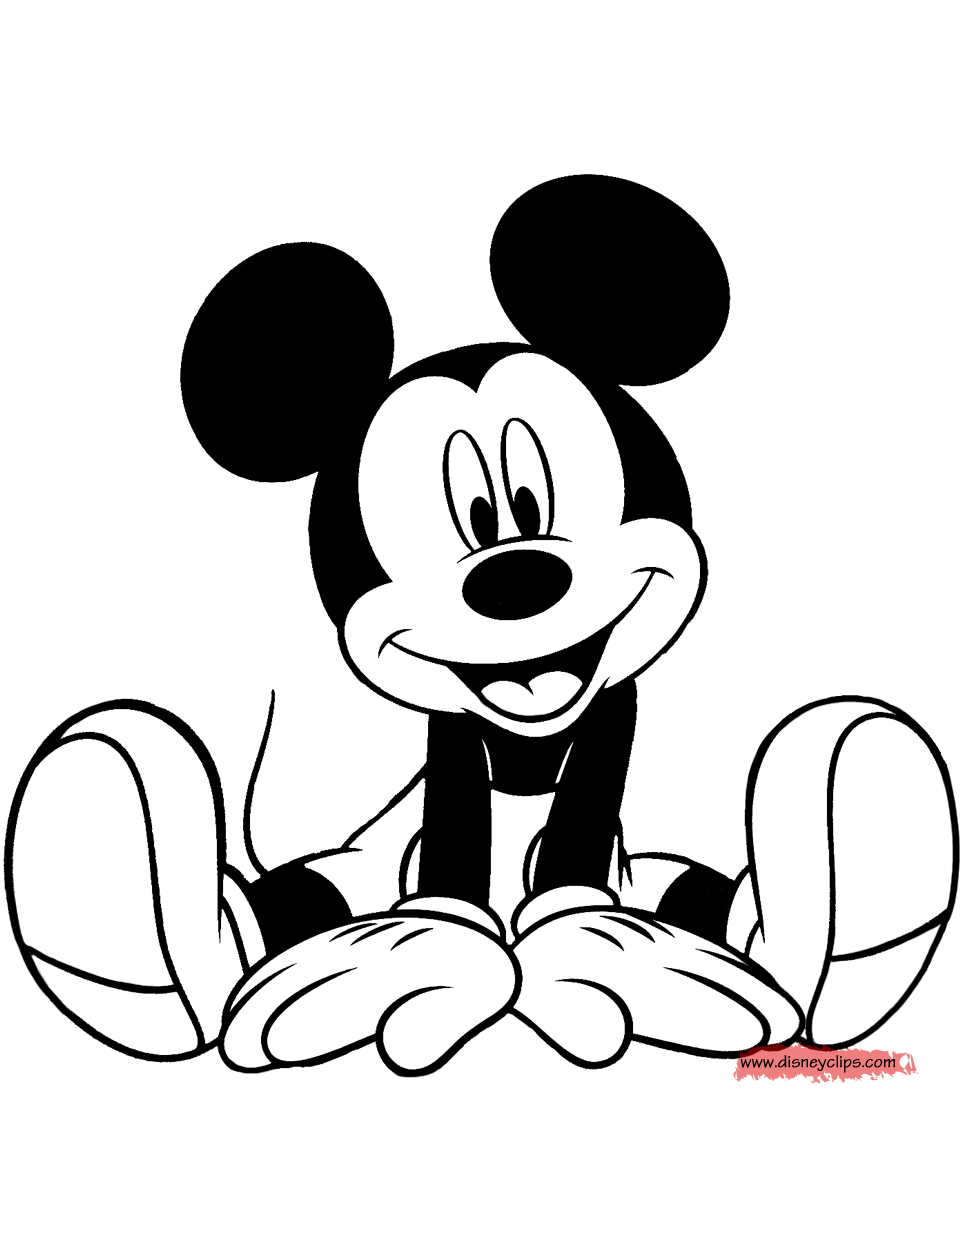 Download Mickey Mouse Coloring Pages 5 | Disney Coloring Book